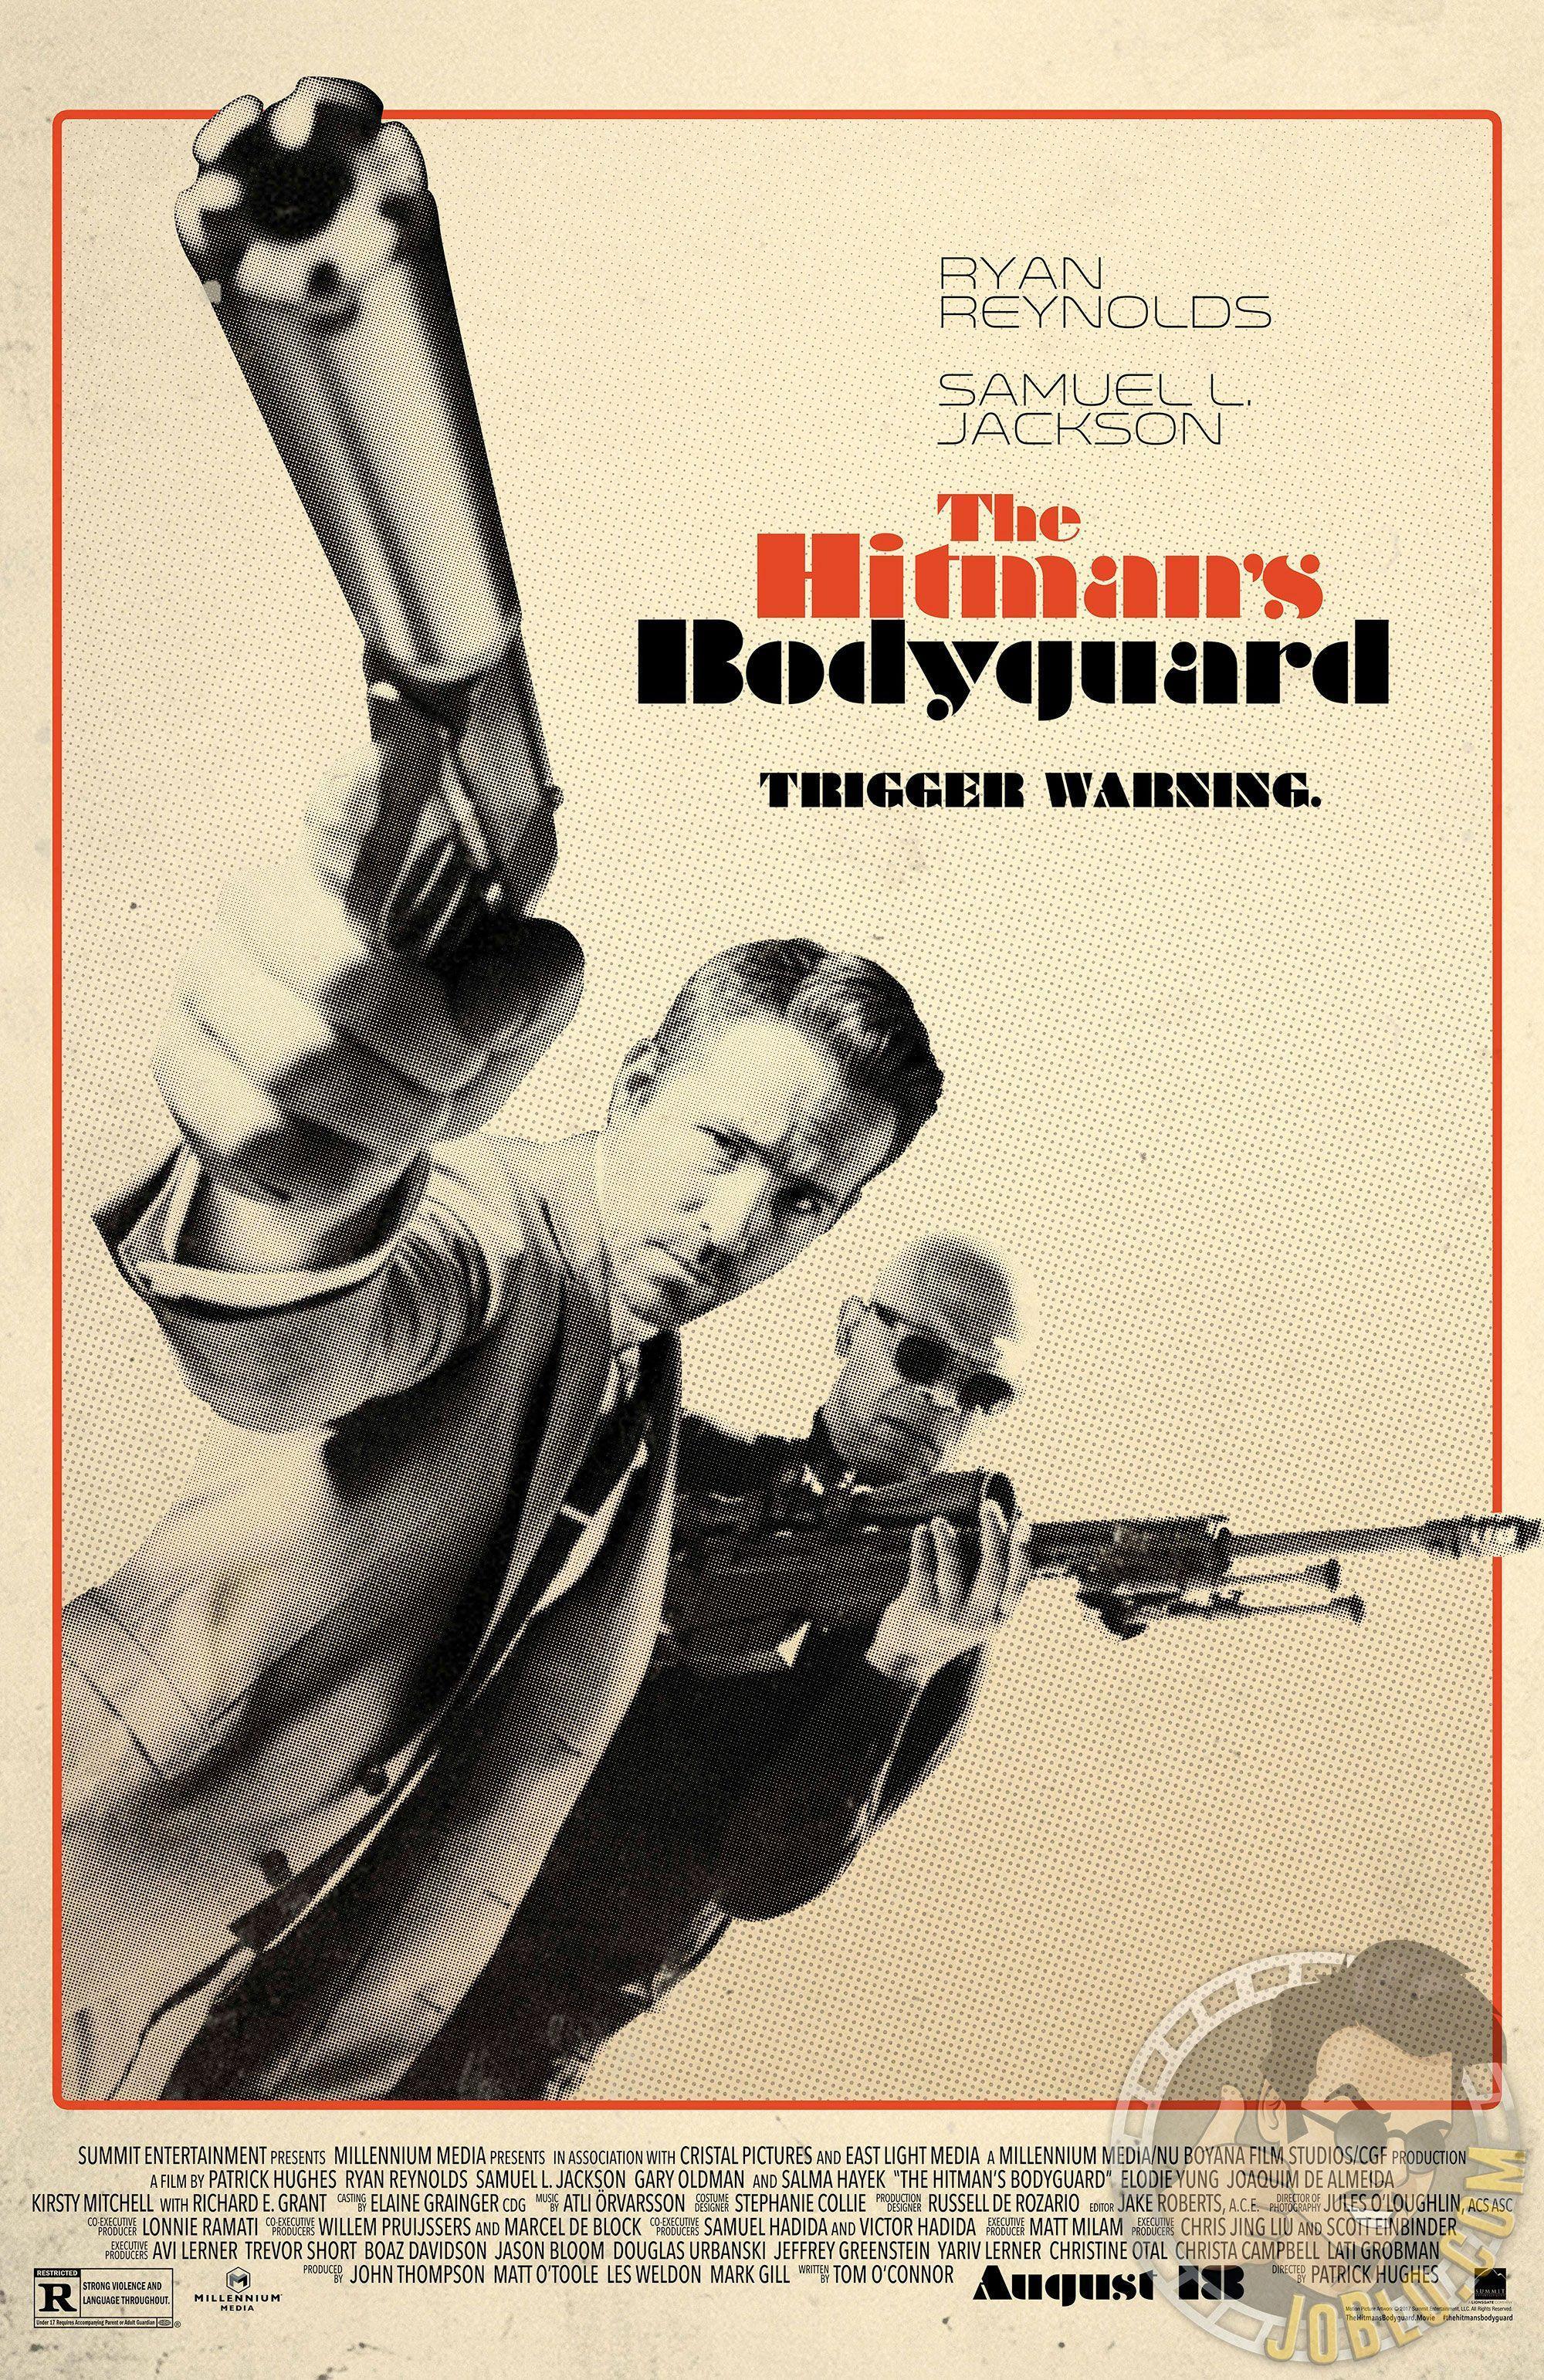 All Movie Posters and Prints for The Hitman's Bodyguard. JoBlo